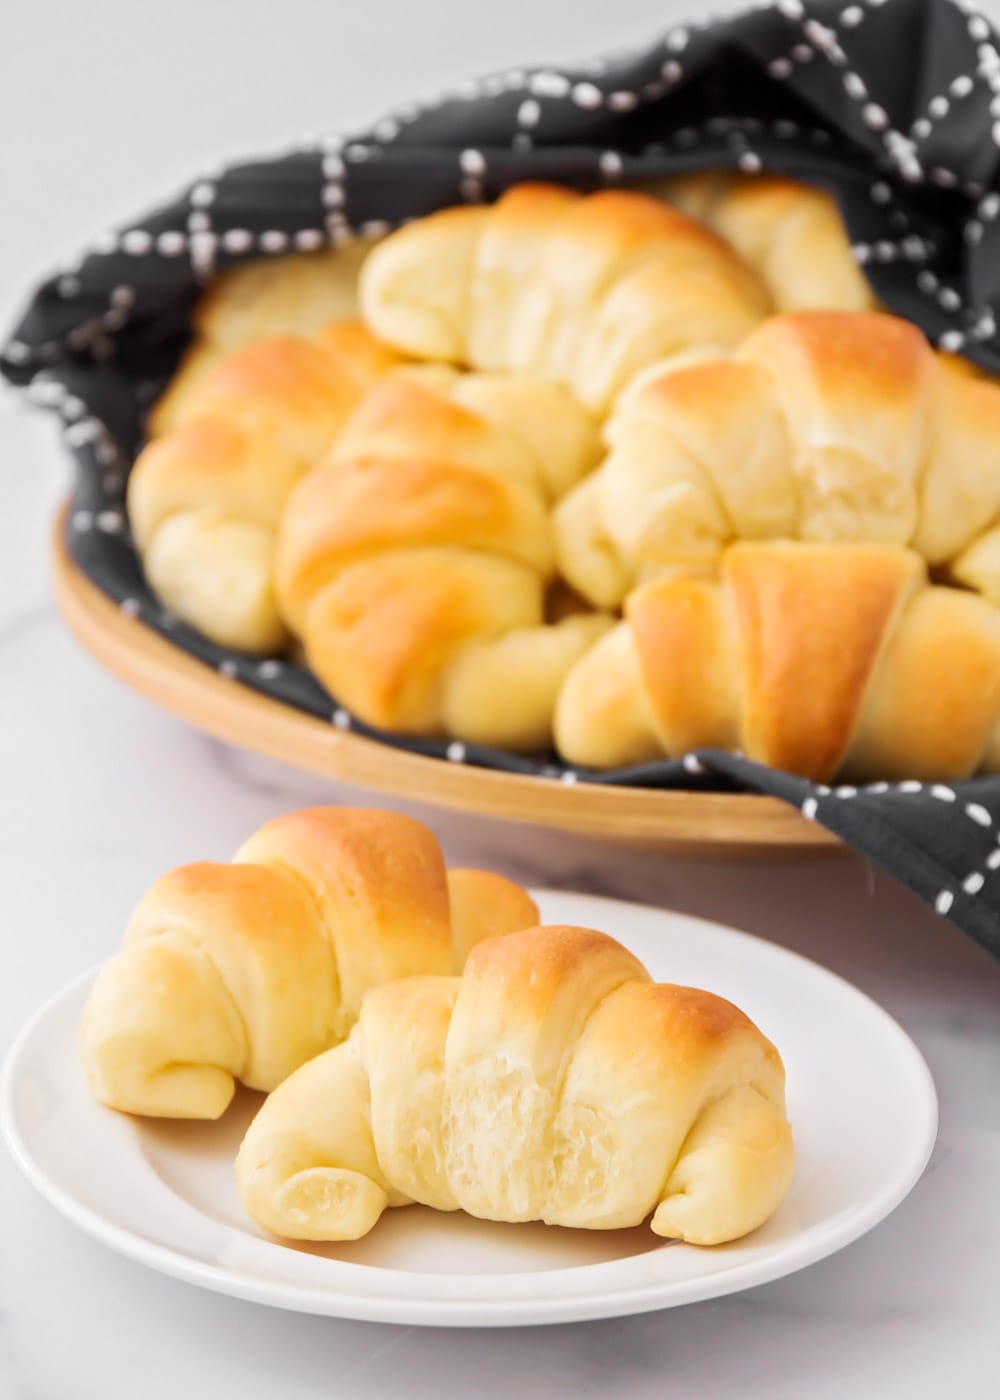 Frosted Homemade Crescent Rolls Recipe